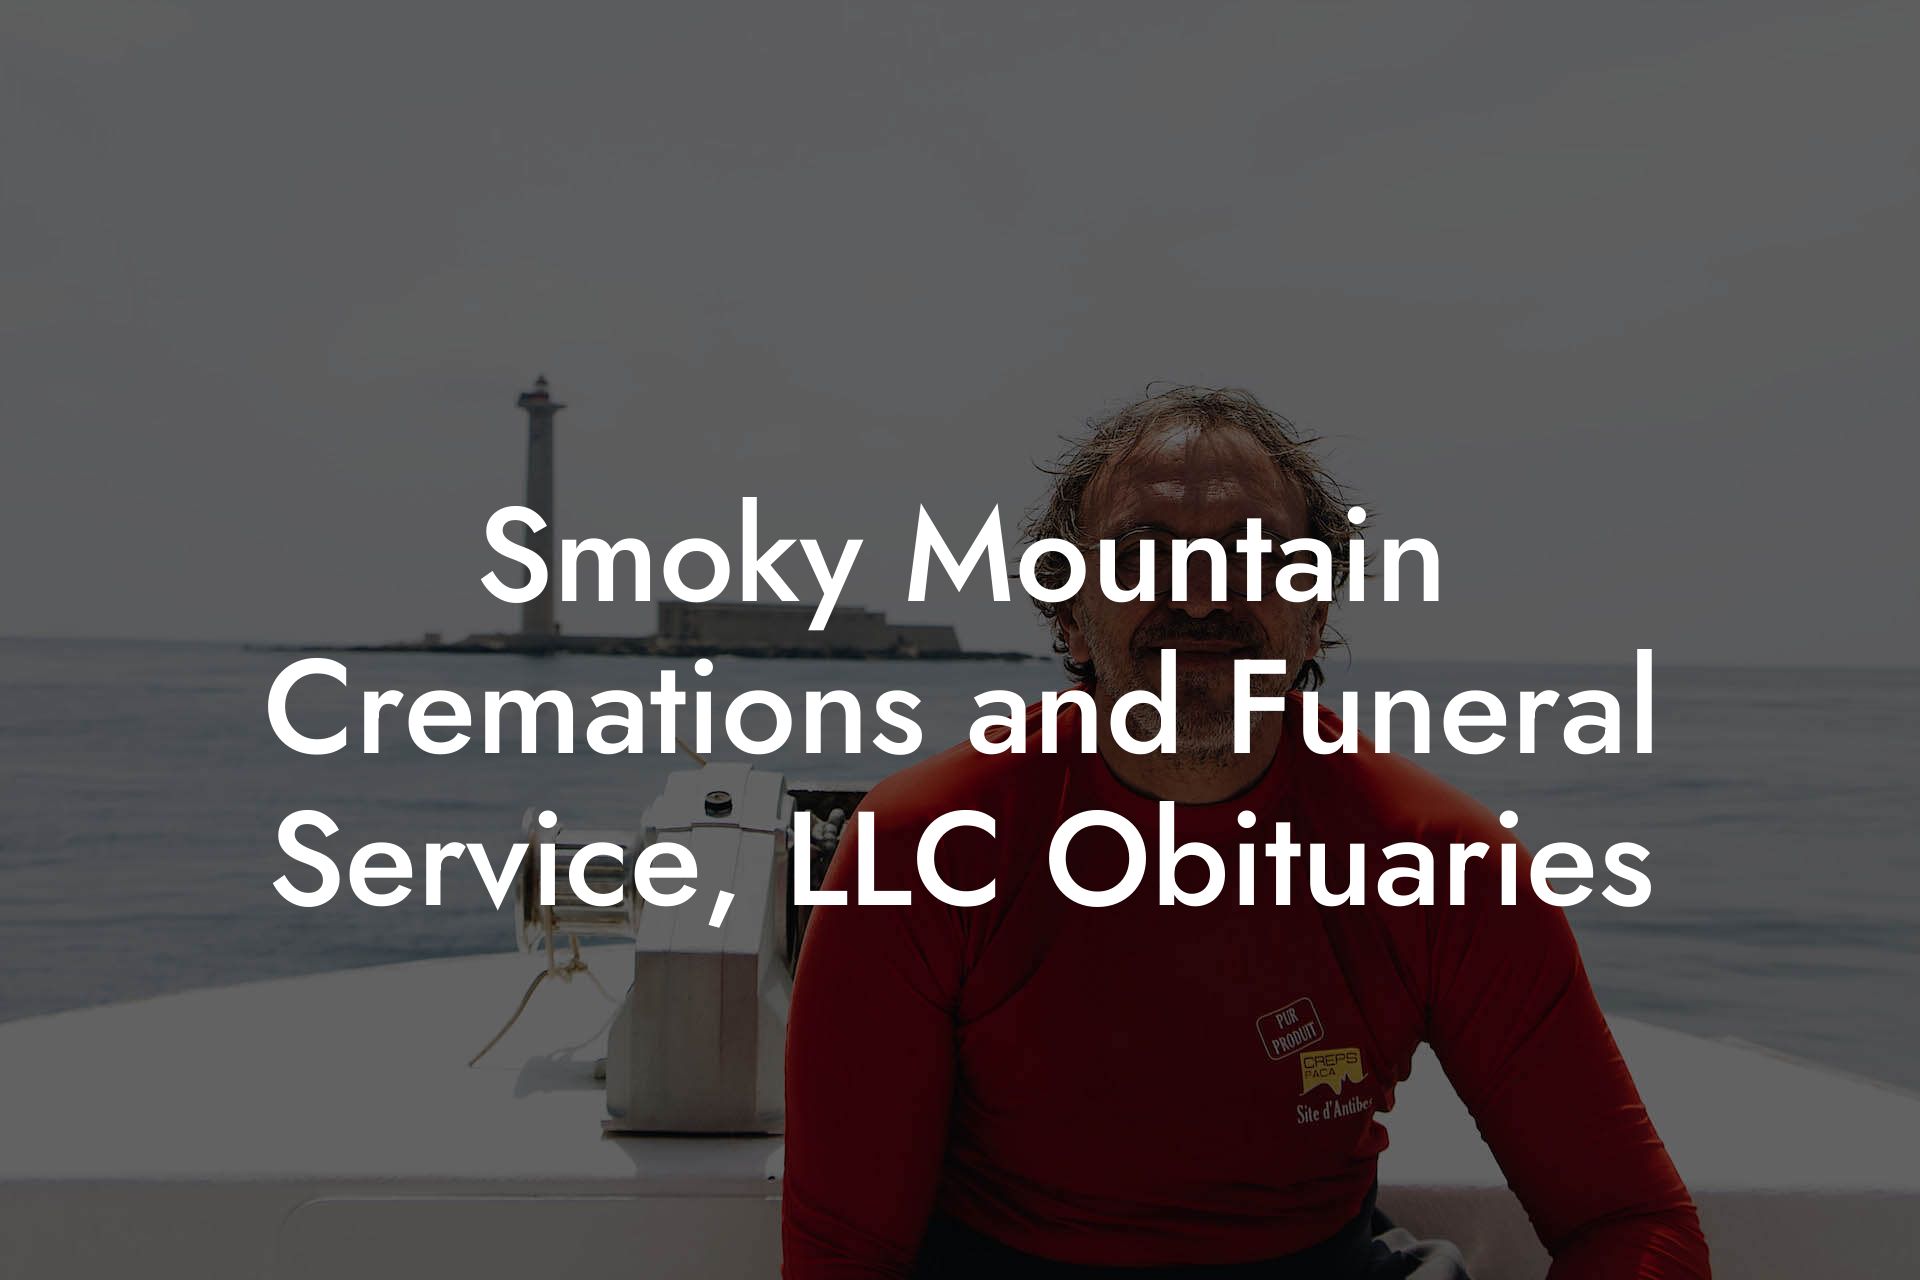 Smoky Mountain Cremations and Funeral Service, LLC Obituaries